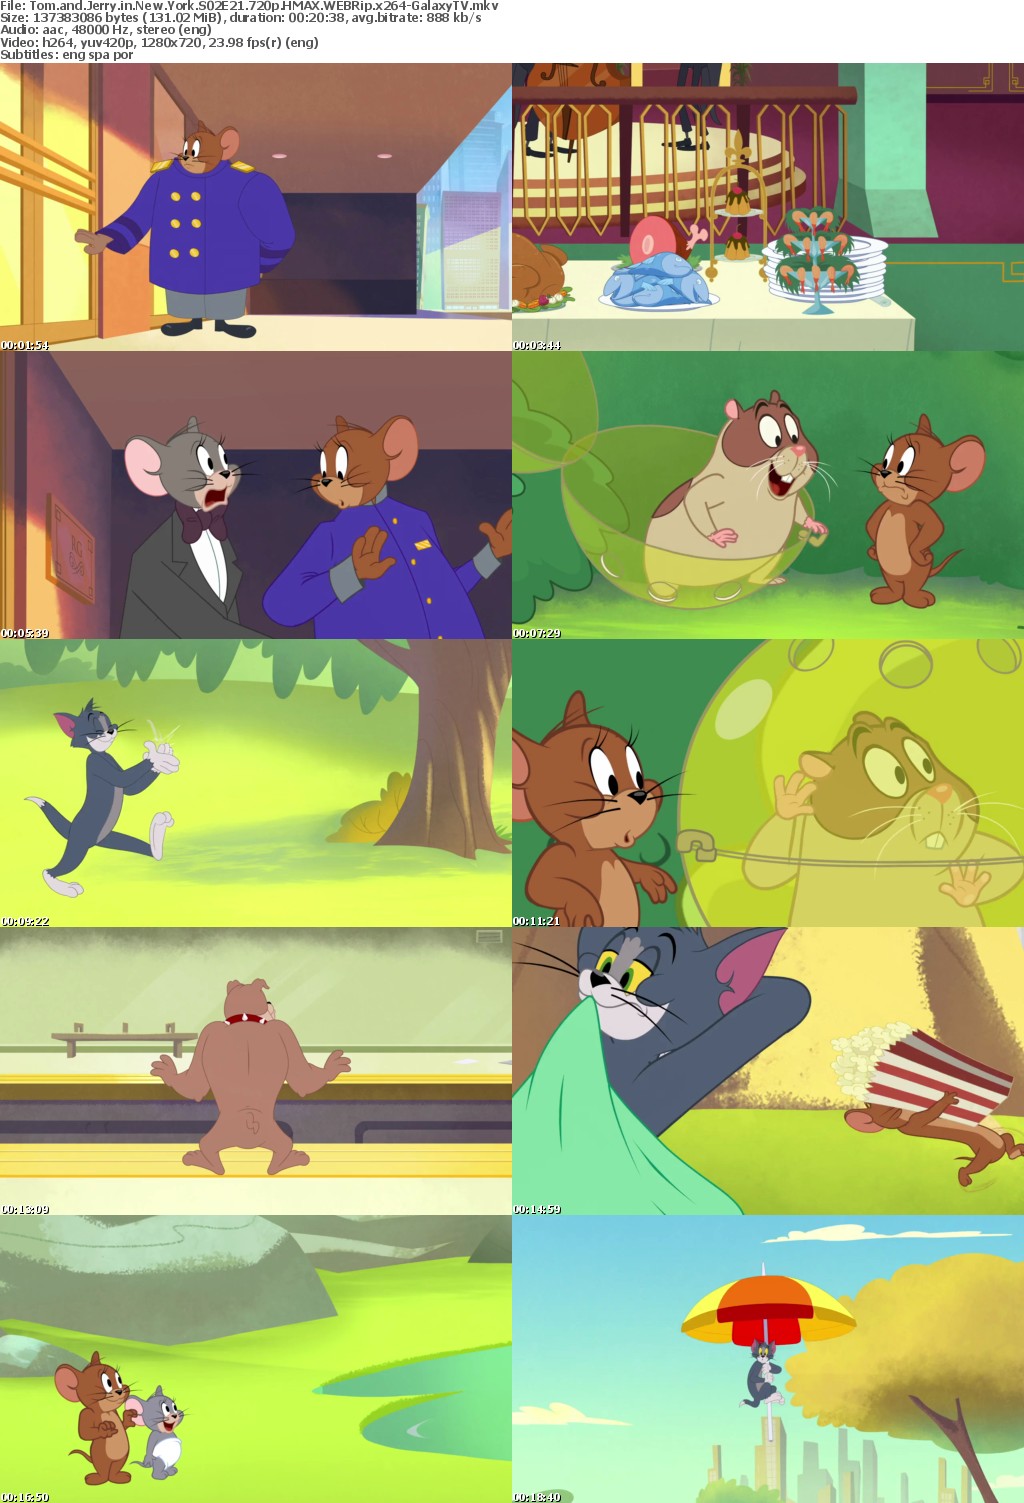 Tom and Jerry in New York S02 COMPLETE 720p HMAX WEBRip x264-GalaxyTV